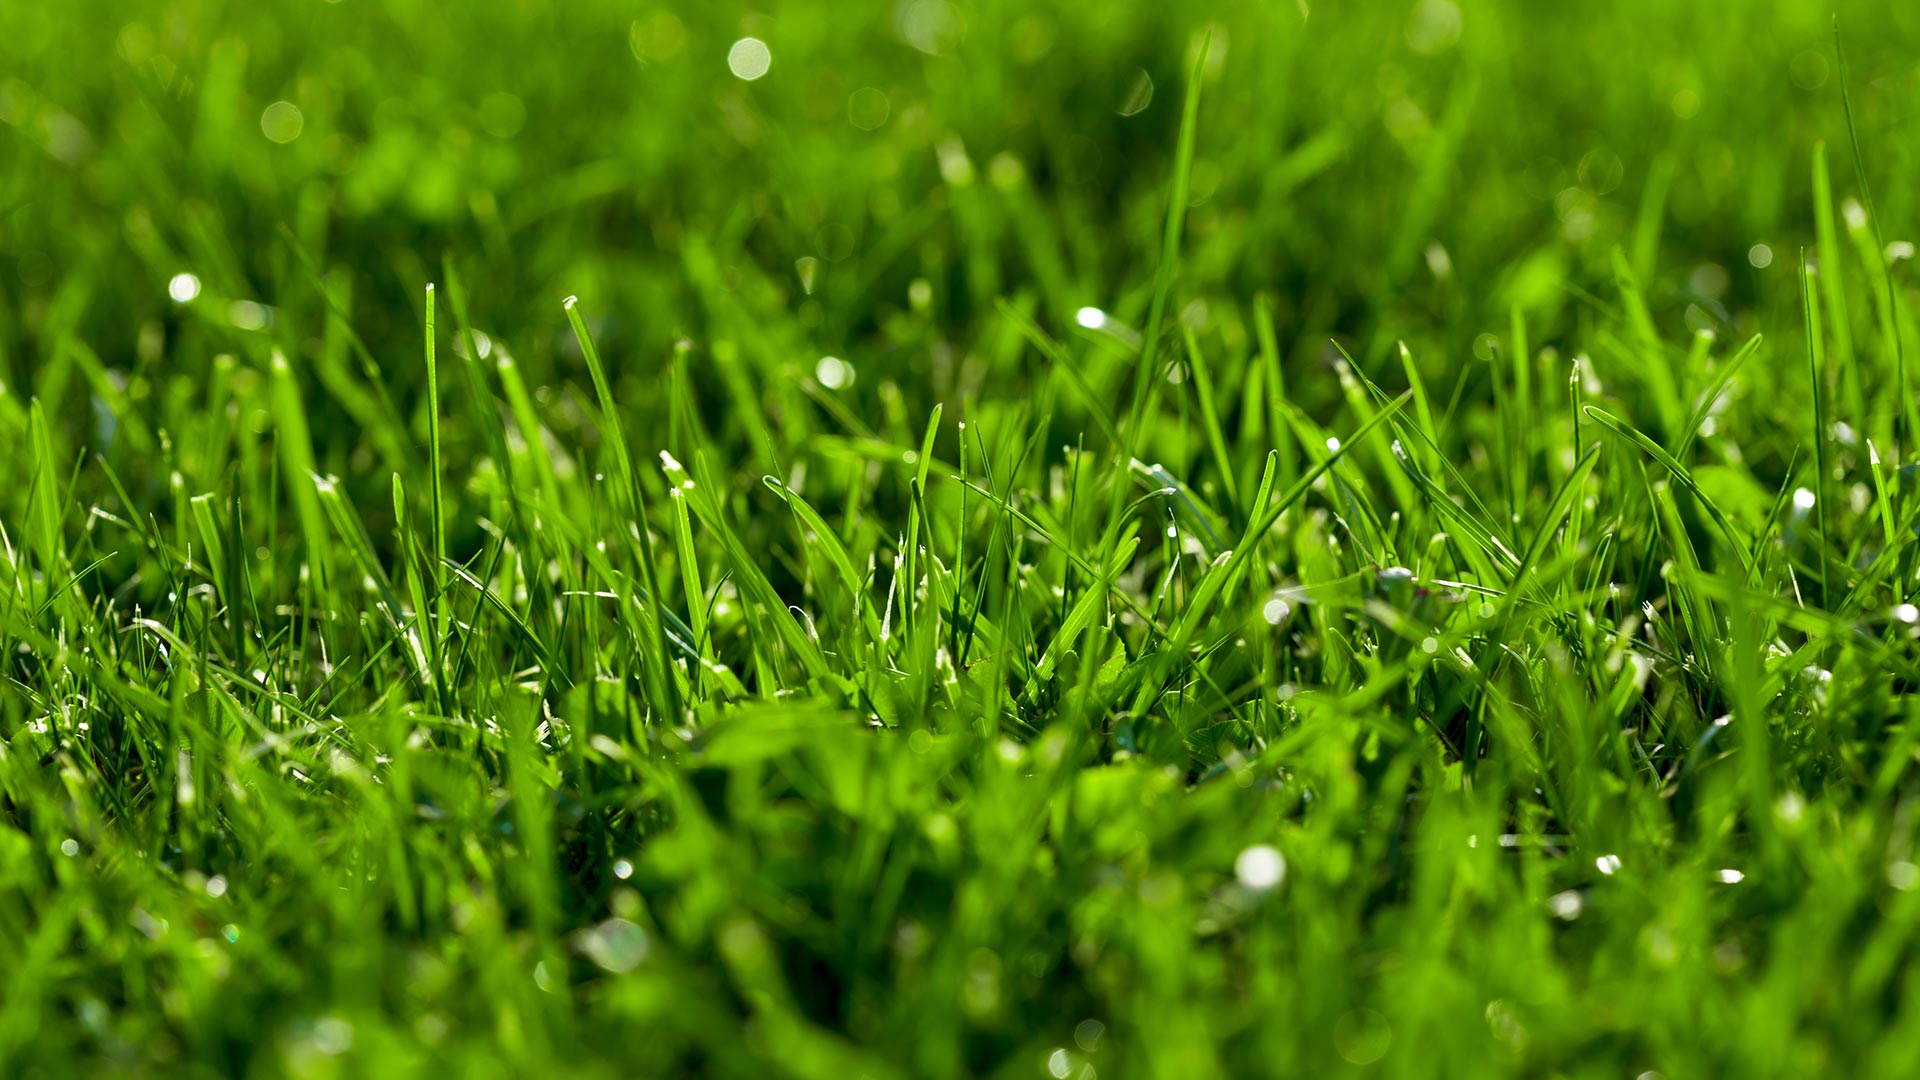 Lawn Care Services That Will Benefit Your Lawn During the Growing Season